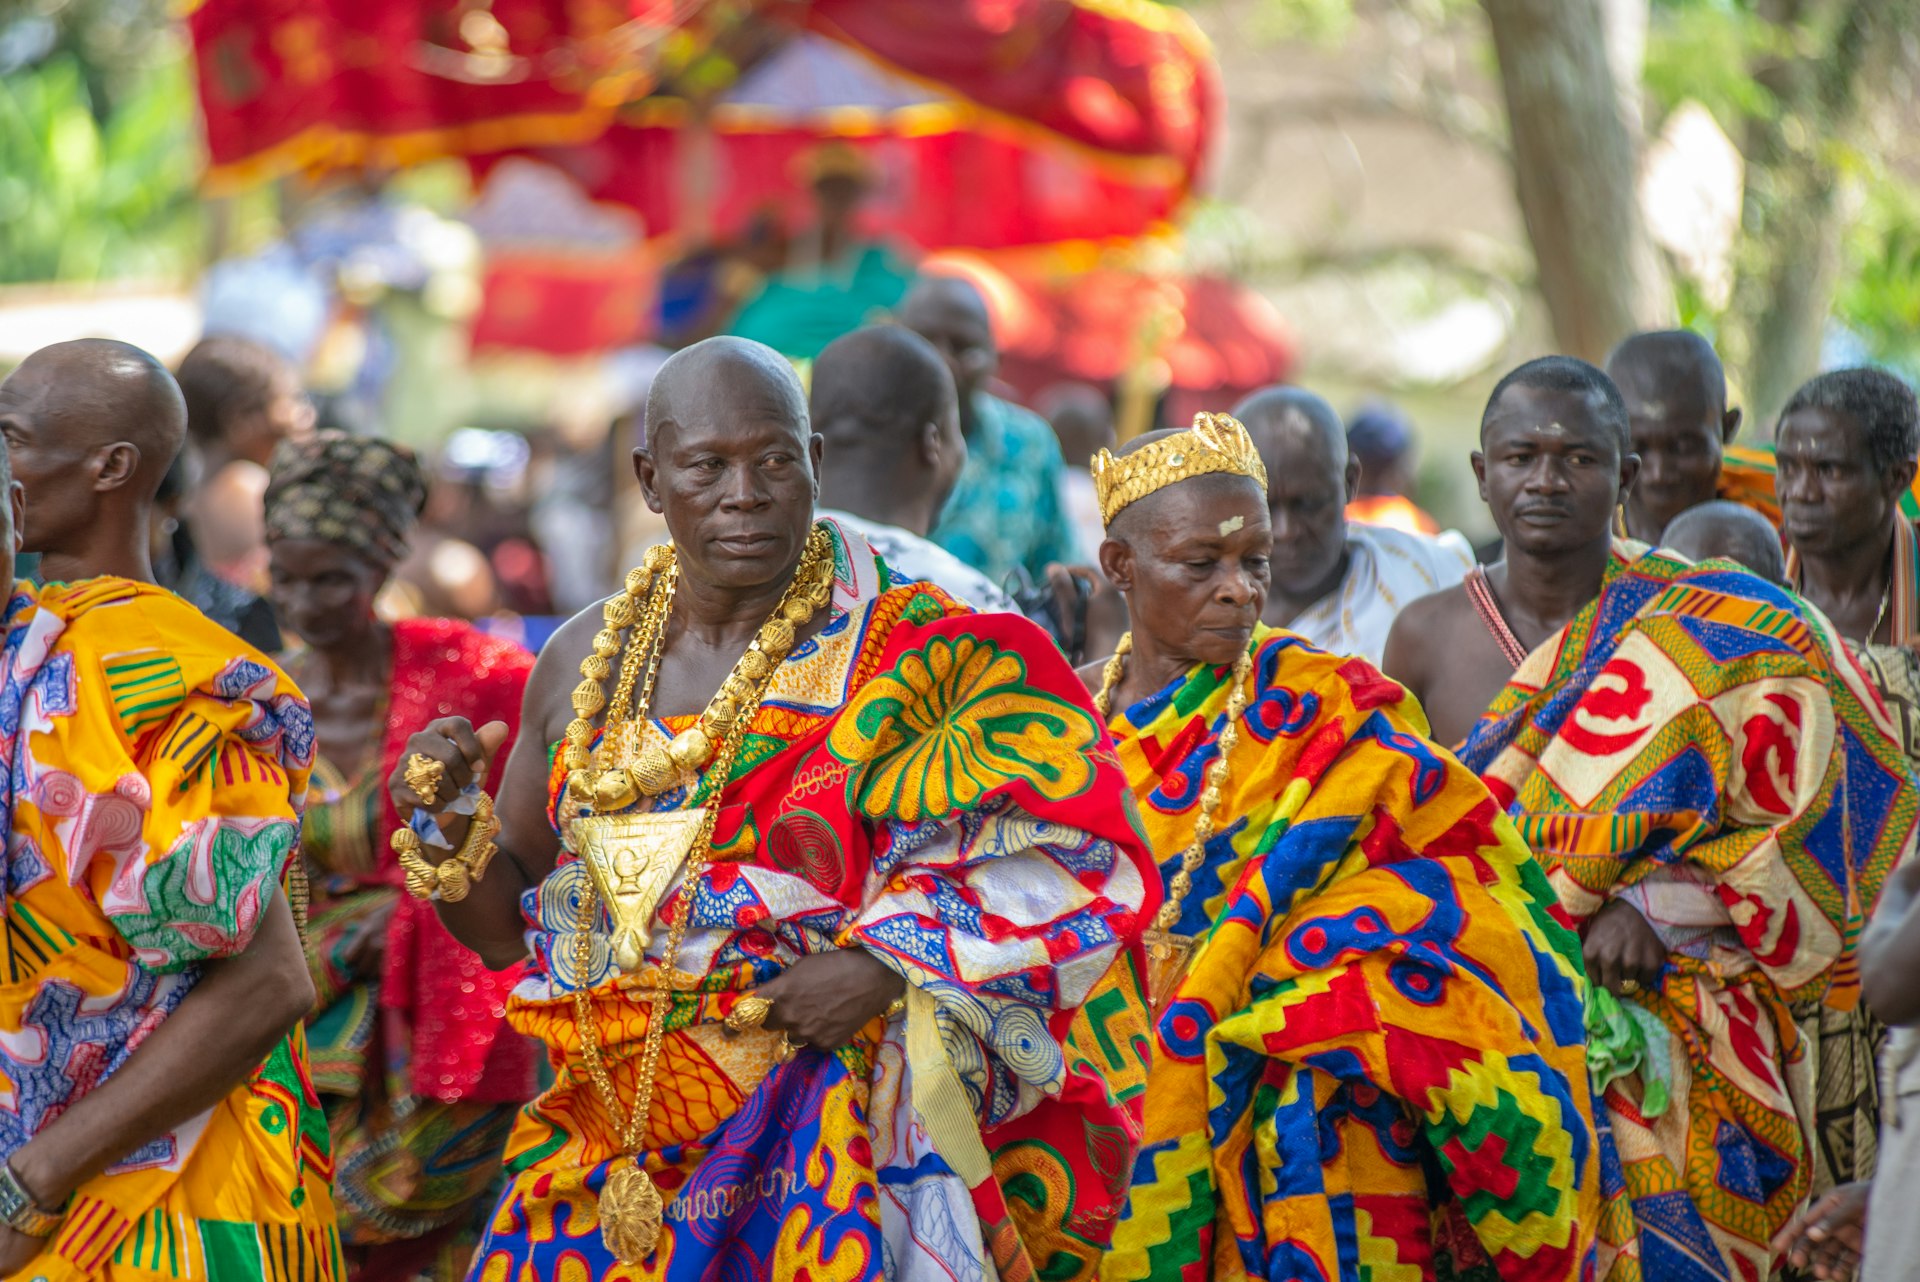 Leaders in brightly colored regalia and kente cloth process during the Odwira Festival in Ghana